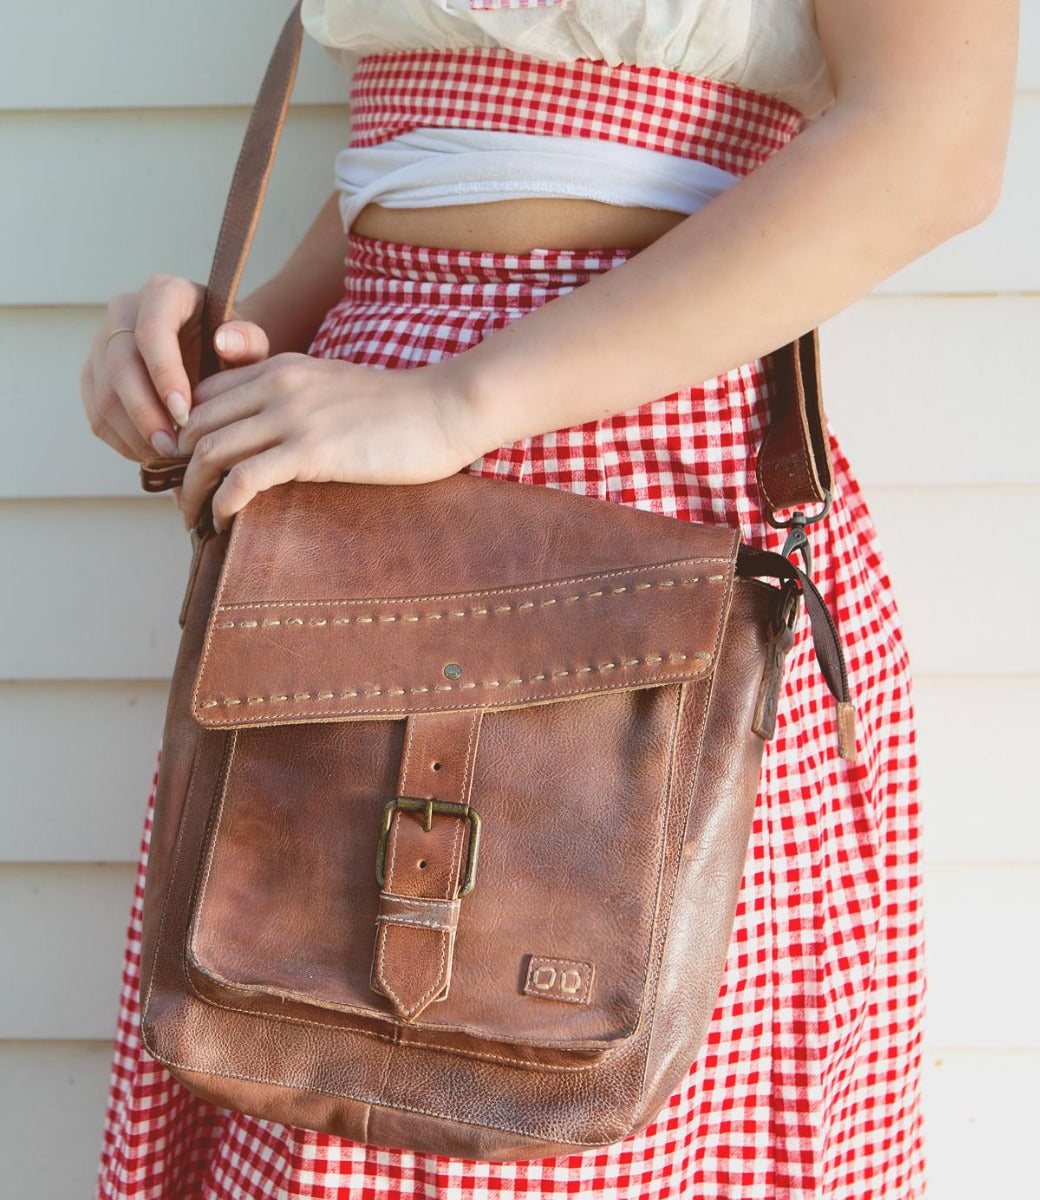 A woman in a red and white skirt holding a Bed Stu Ainhoa brown leather crossbody handbag.